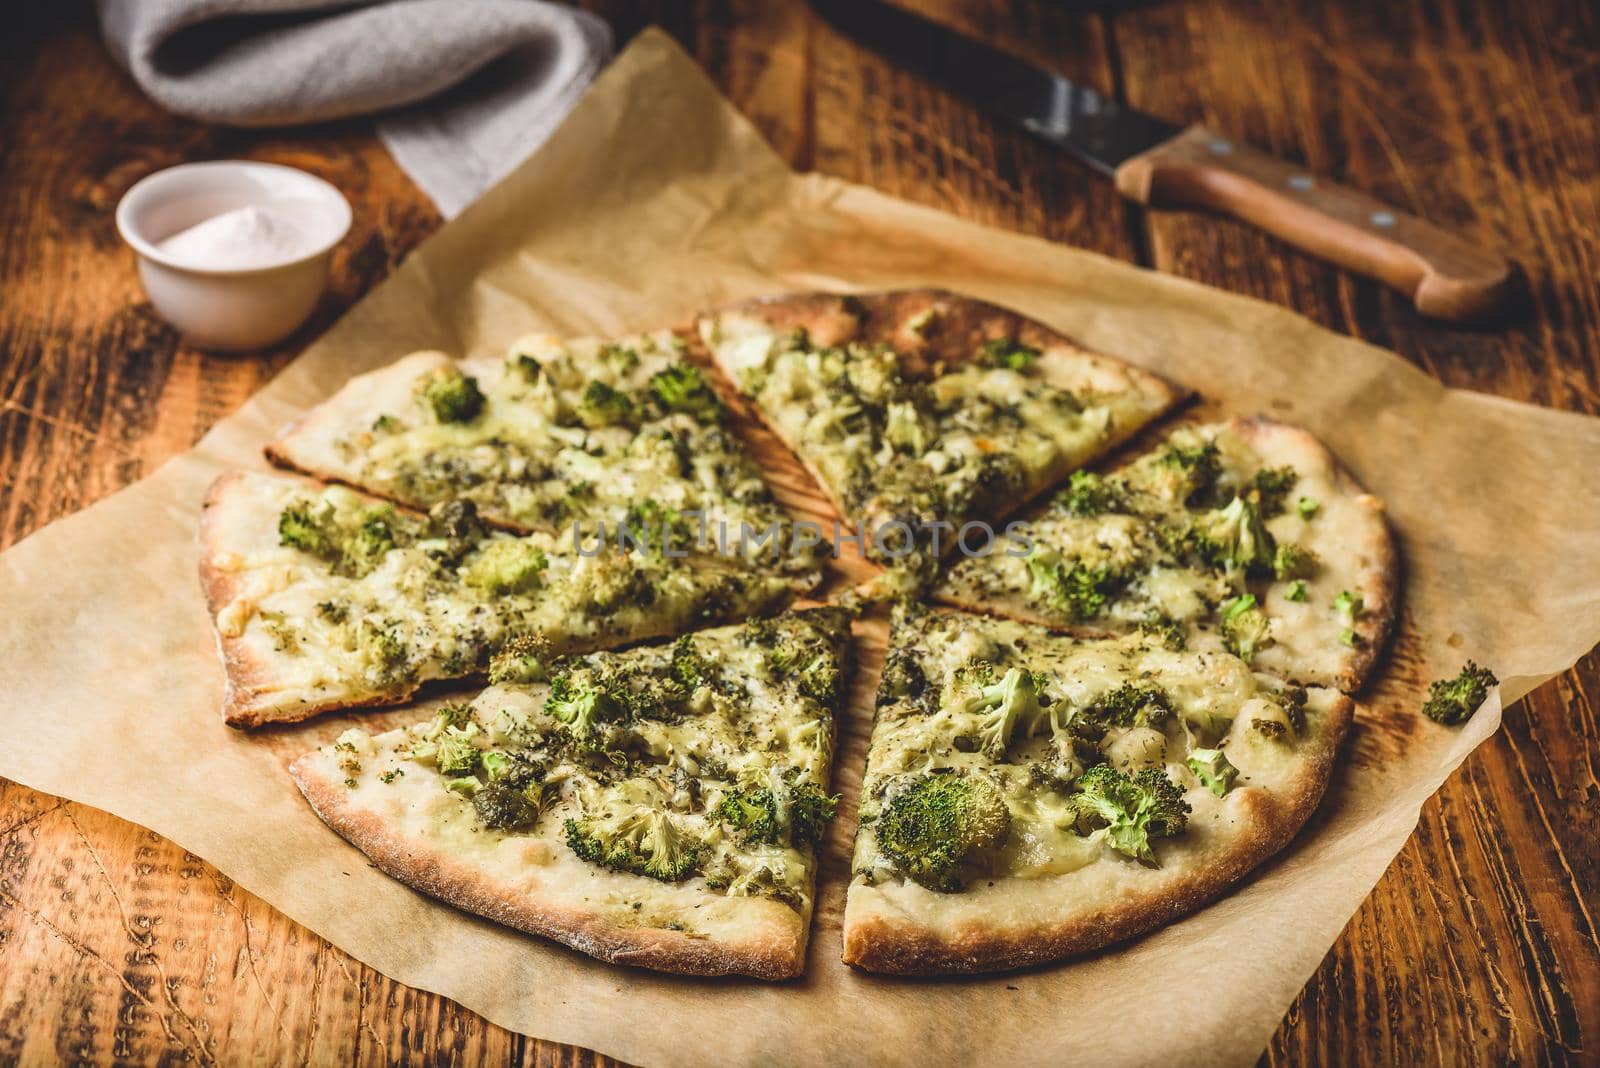 Homemade pizza with broccoli, pesto sauce and cheese by Seva_blsv